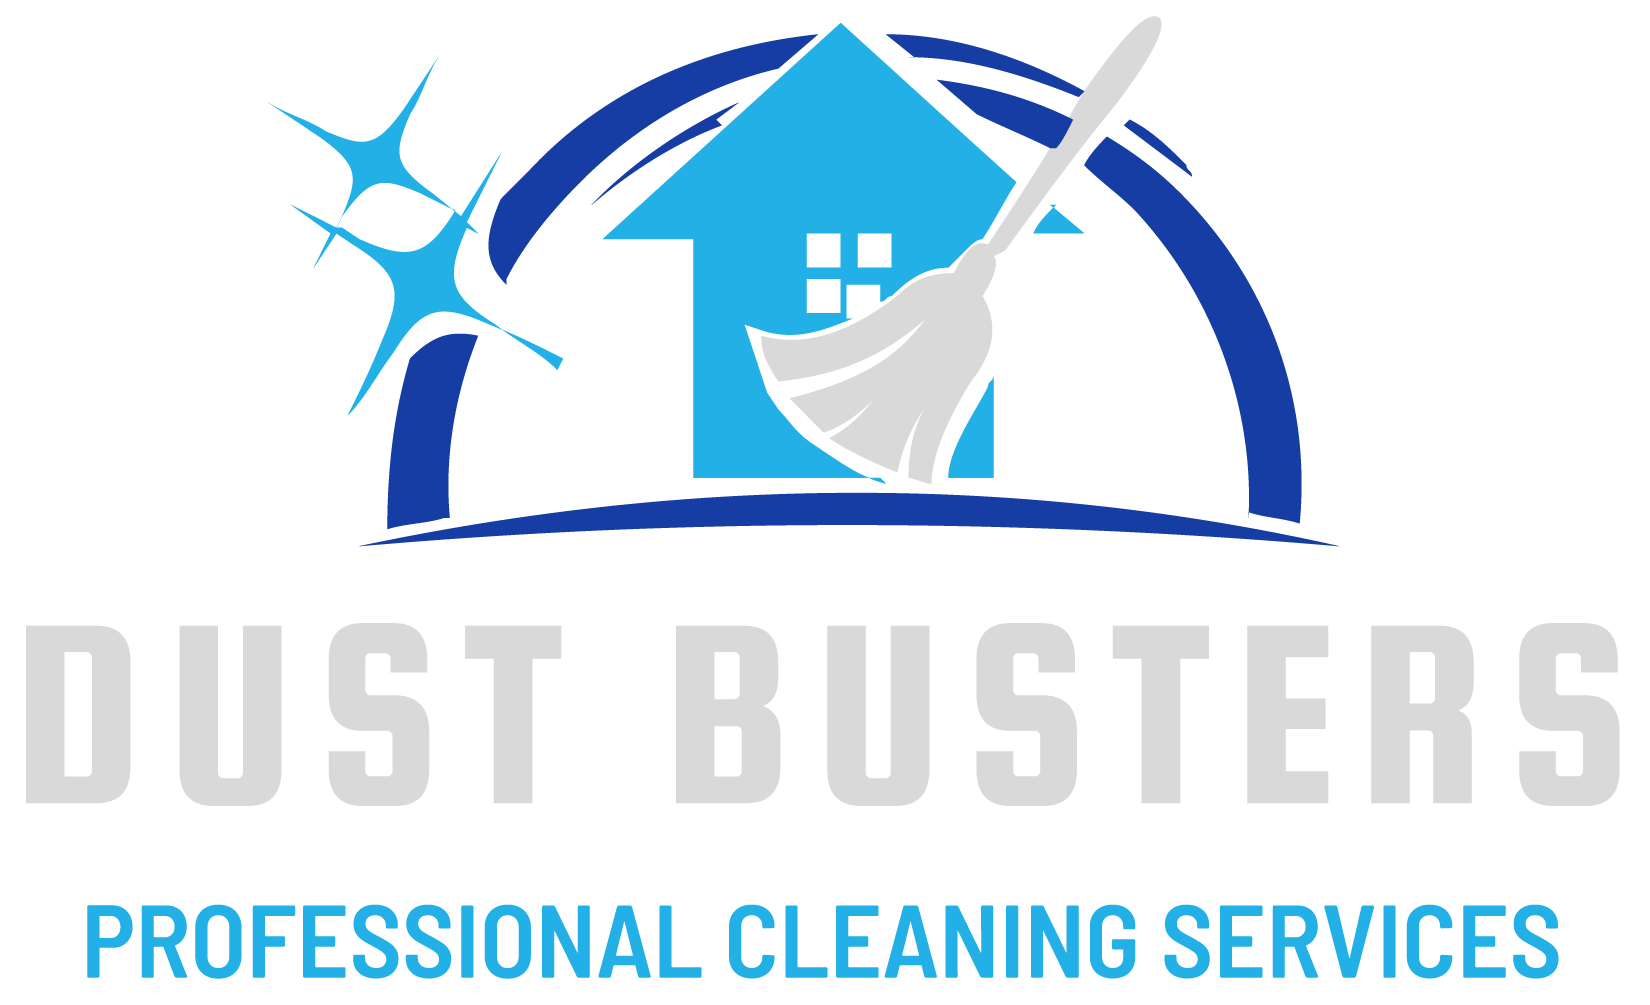 DustbustersCNY Cleaning Services